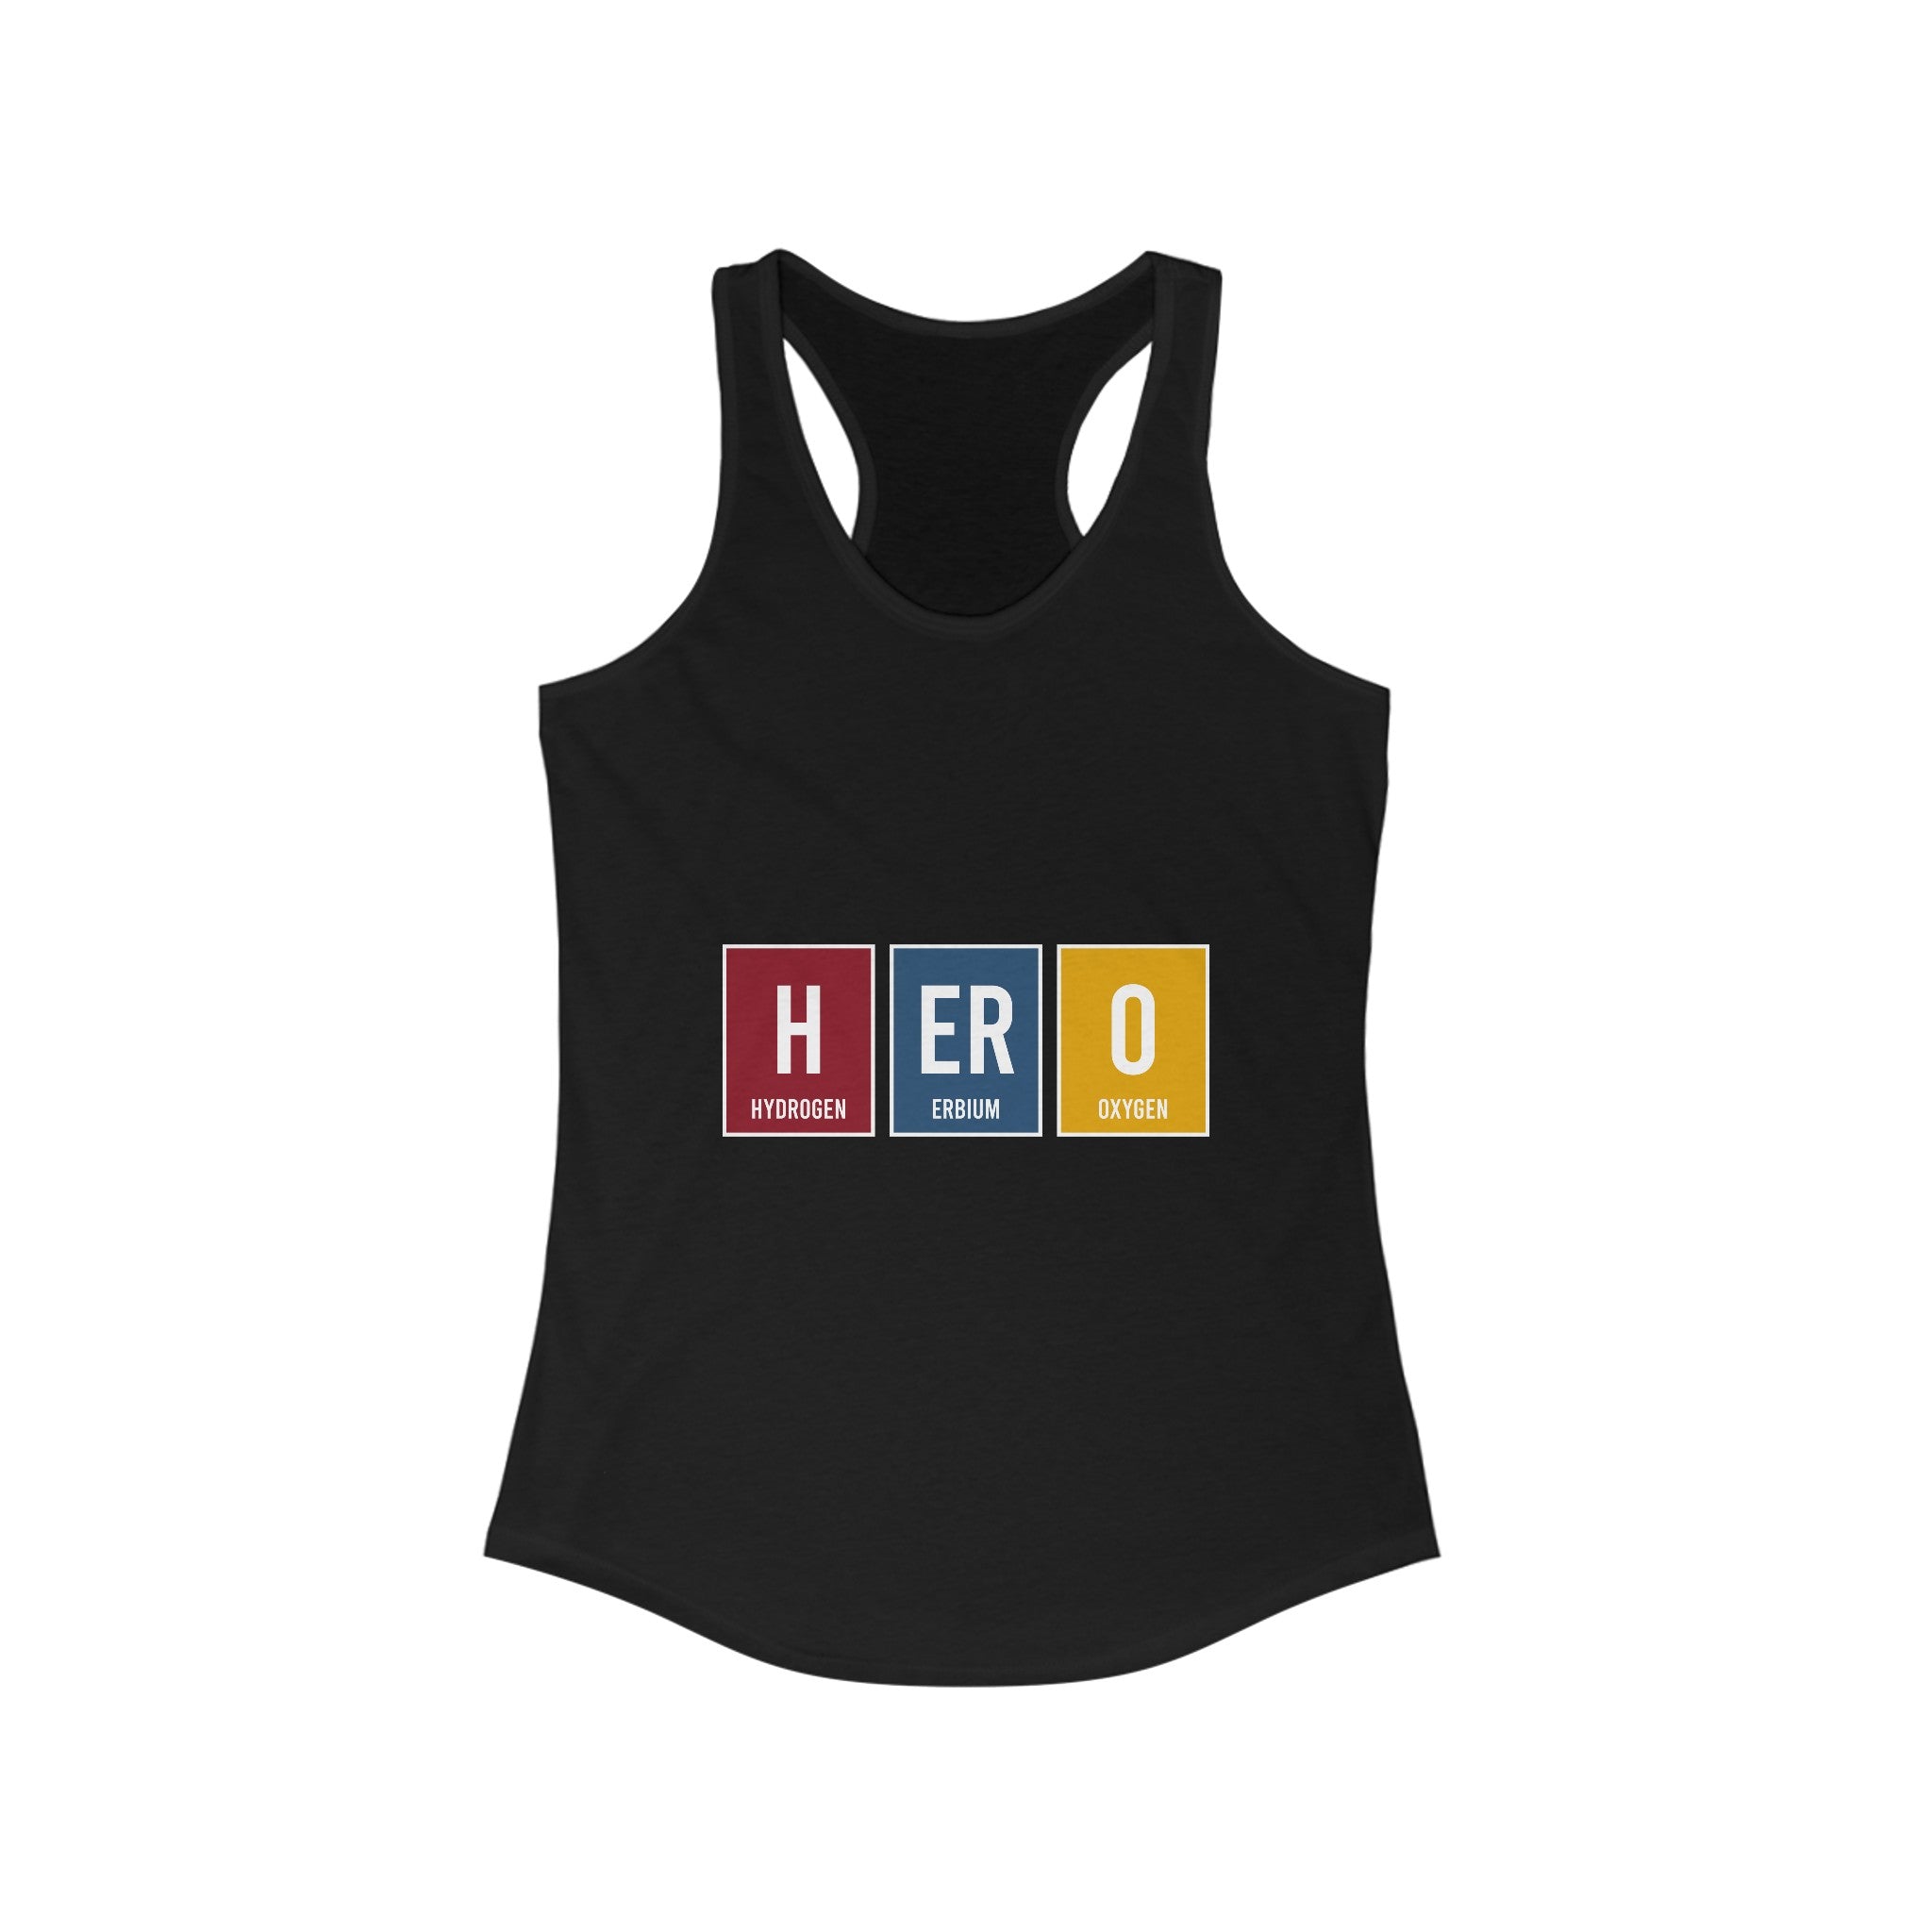 Lightweight black HERO - Women's Racerback Tank featuring the word "HERO" with each letter represented by the periodic table elements: Hydrogen (H), Erbium (Er), and Oxygen (O). Perfect for active lifestyles.